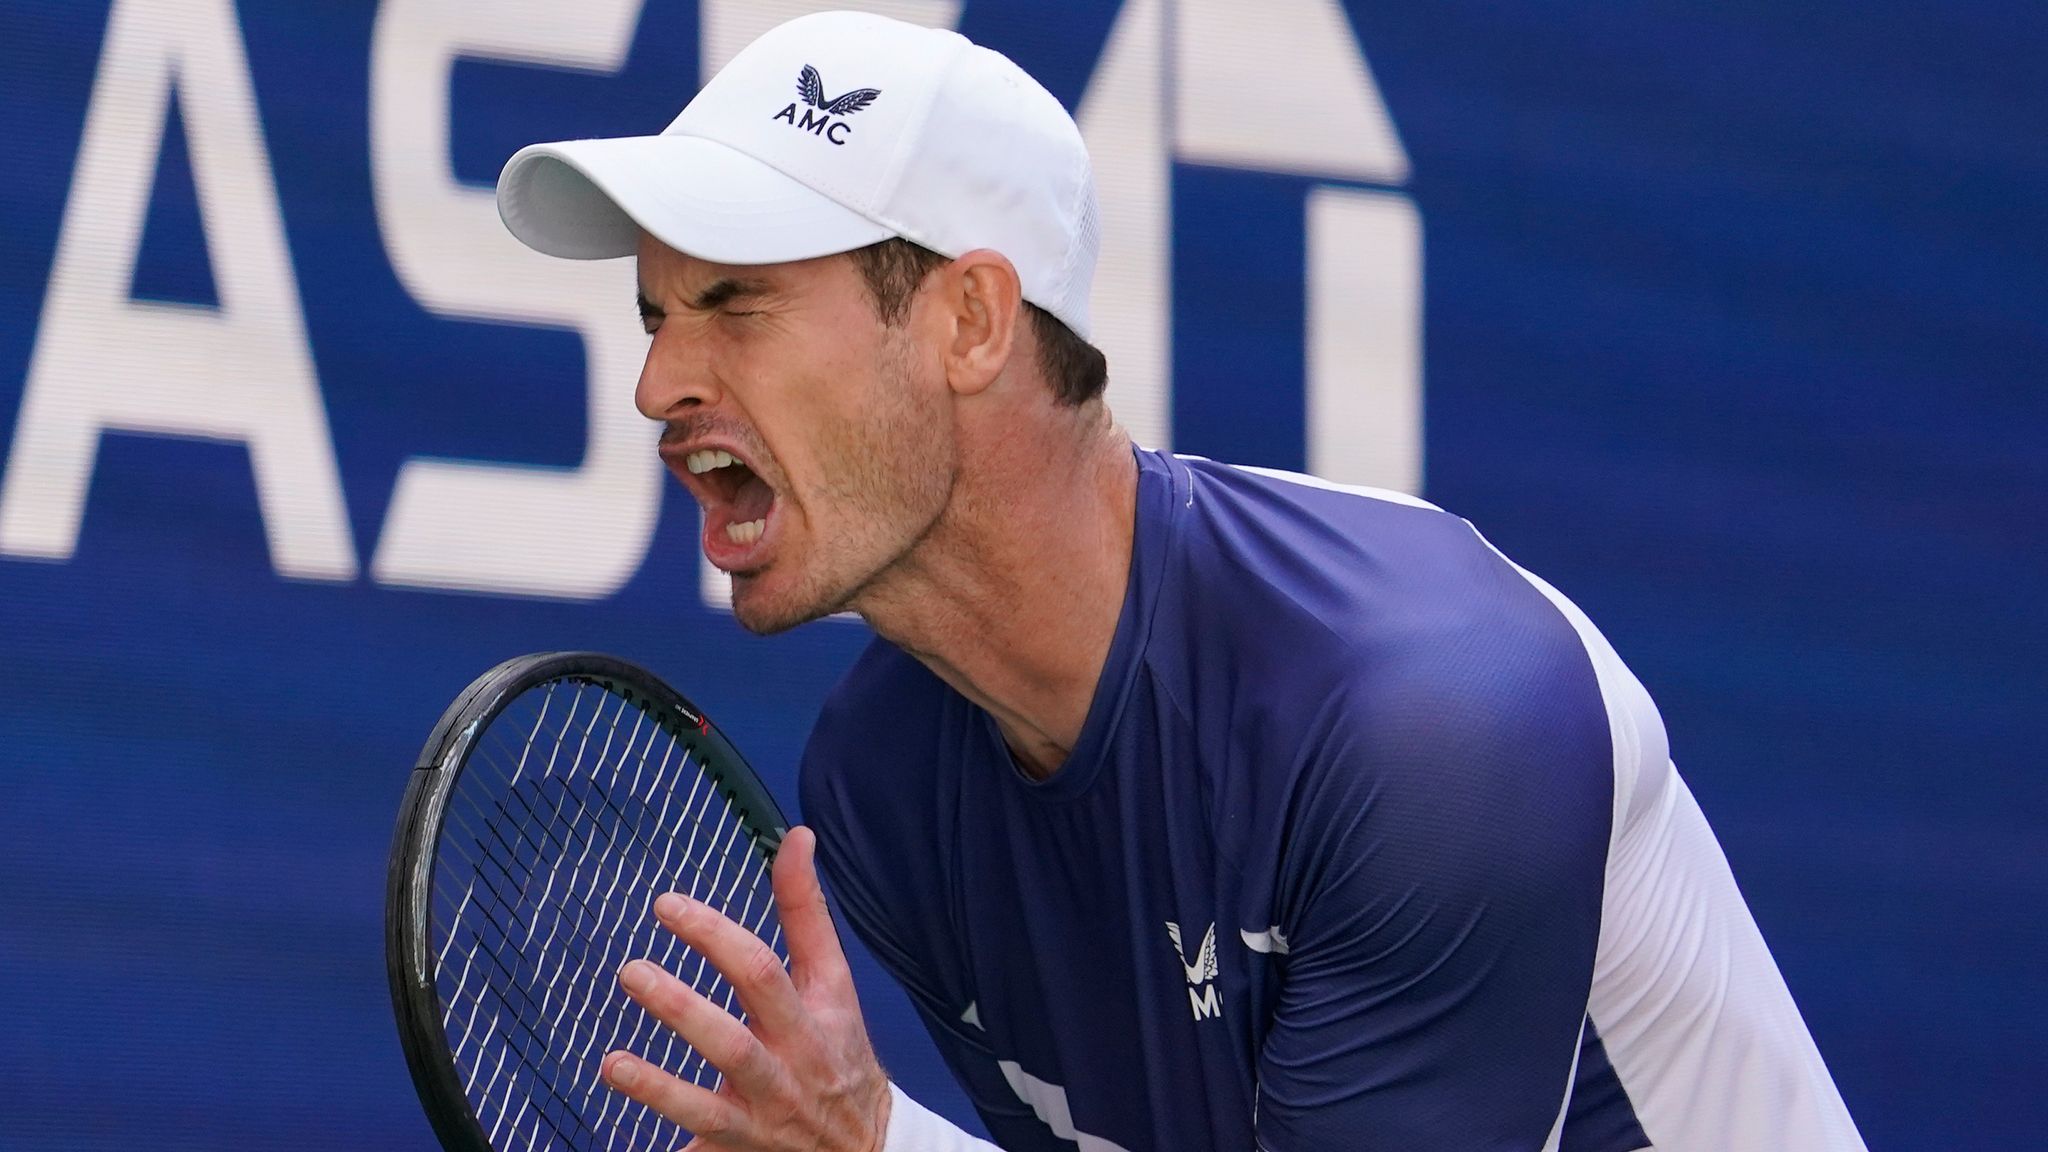 US Open Andy Murray goes down in four sets to Matteo Berrettini in New York Tennis News Sky Sports